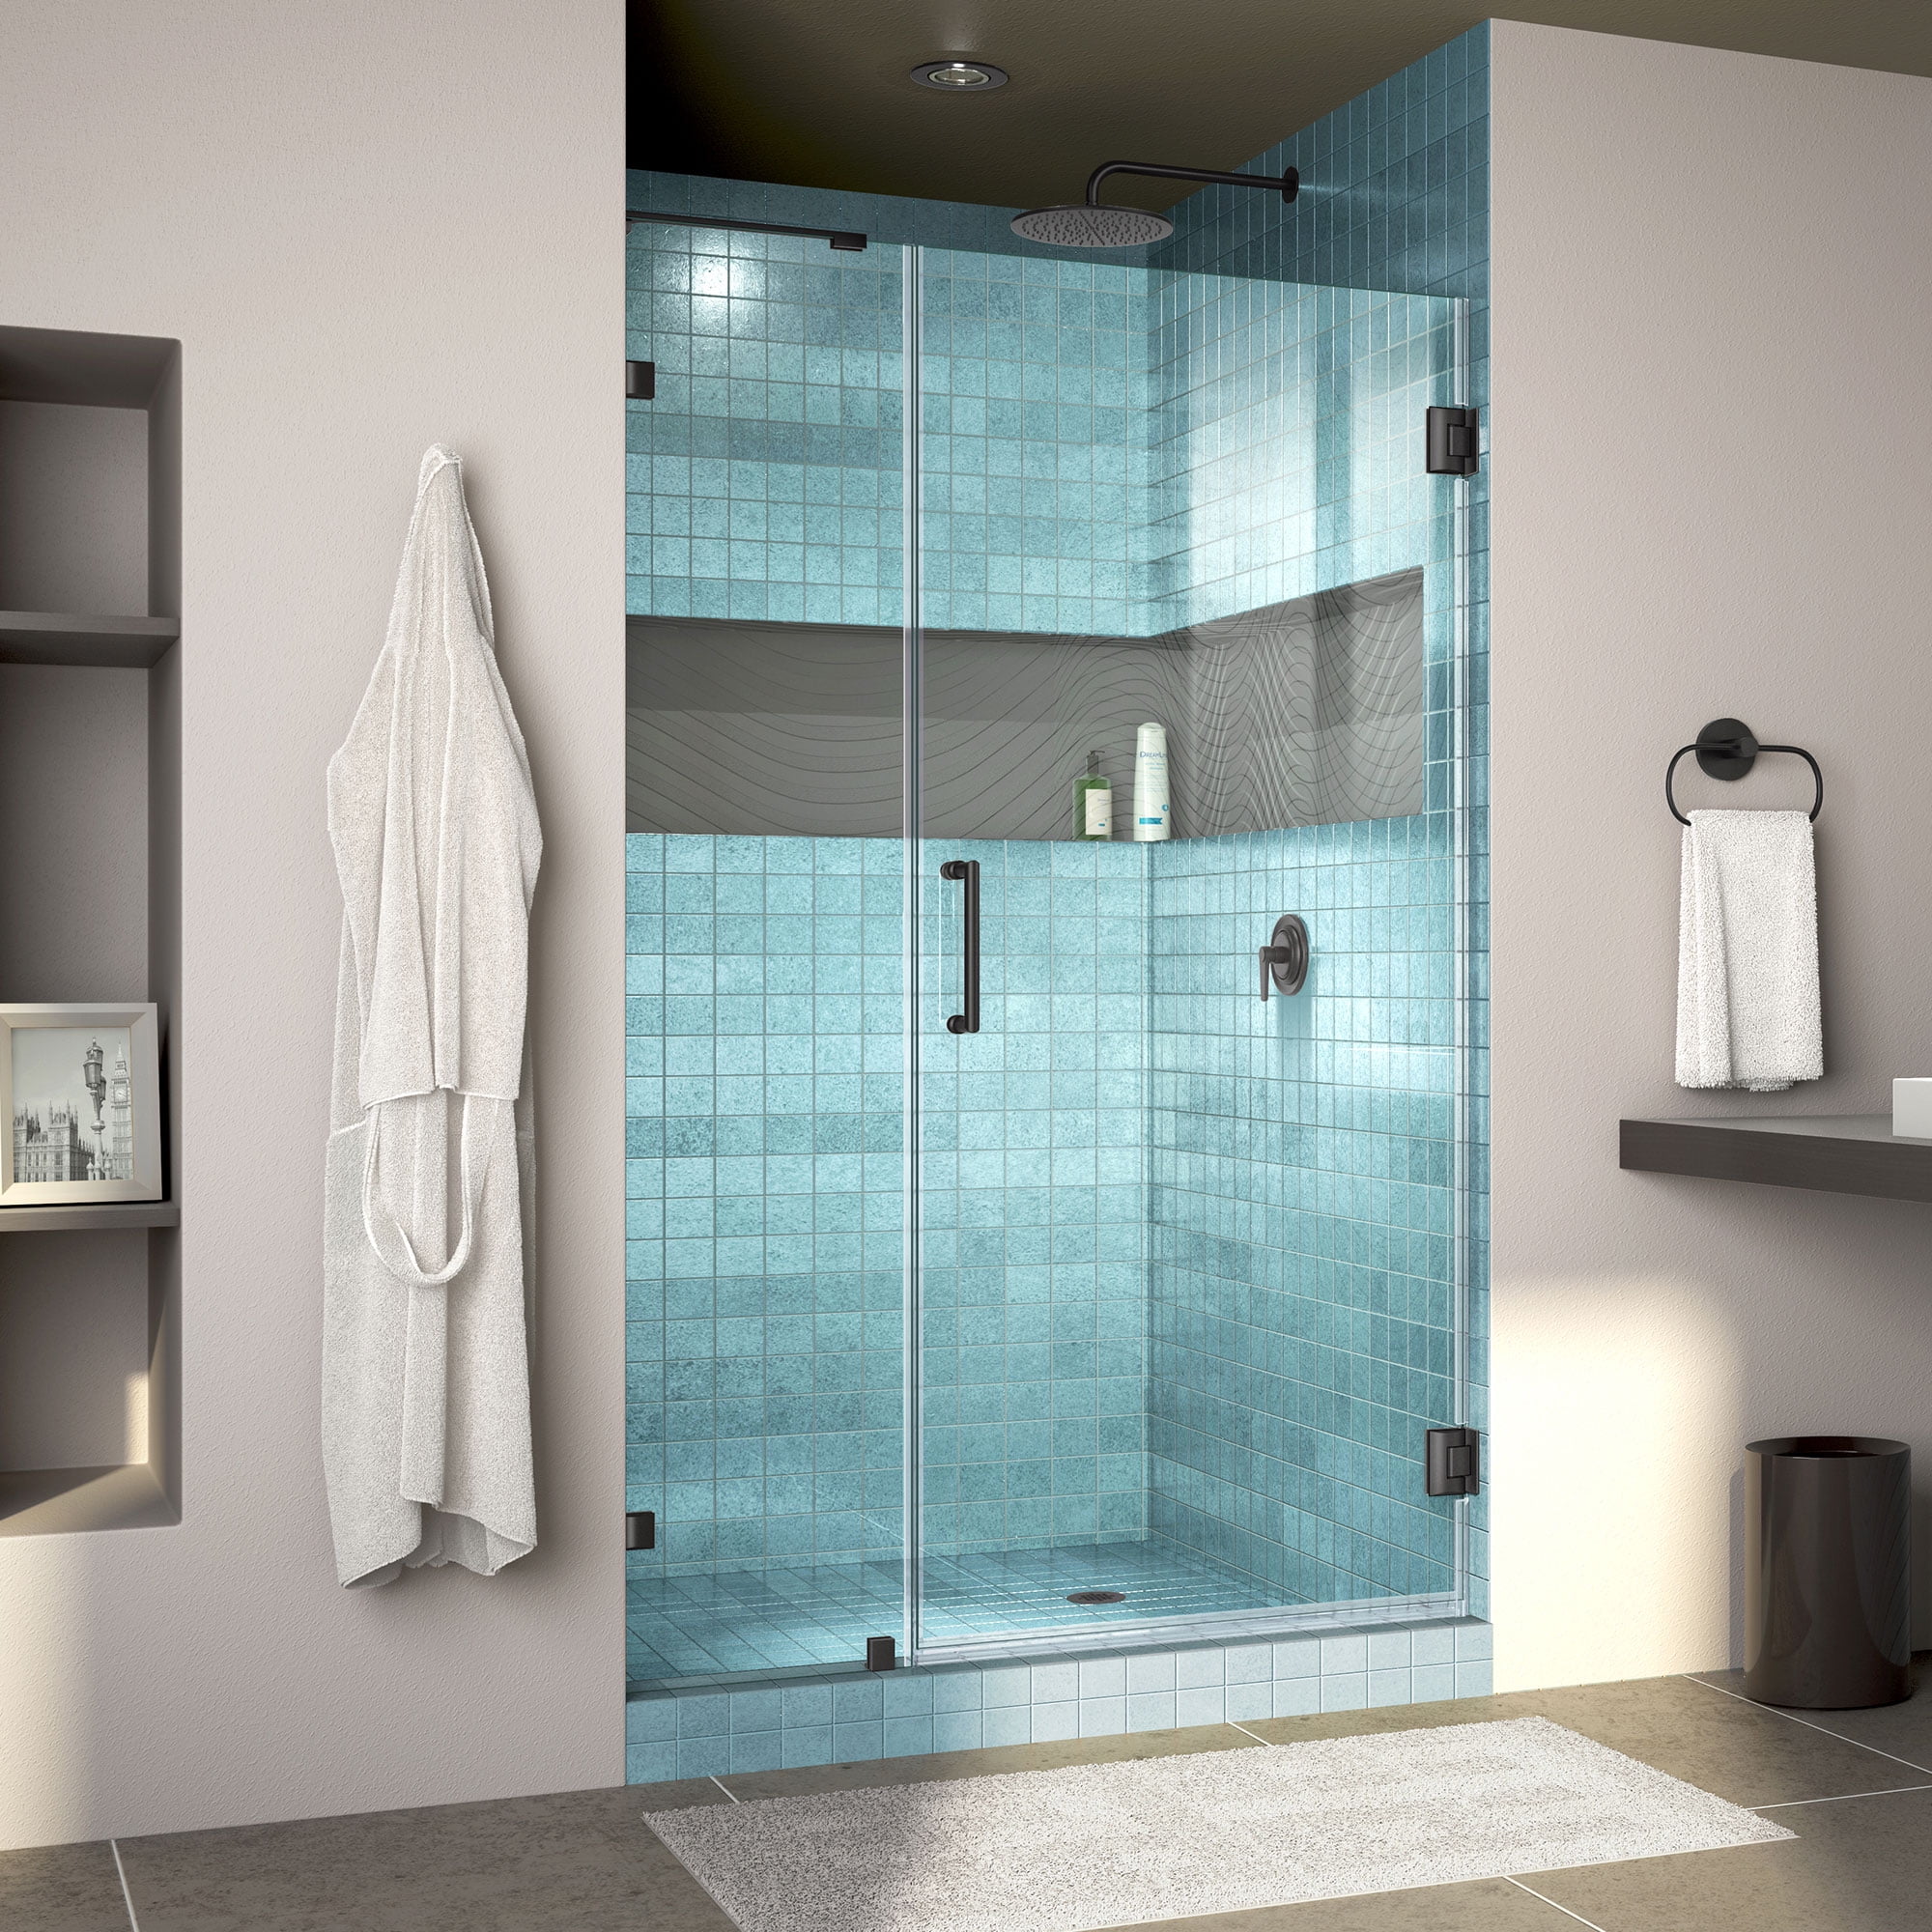 DreamLine Unidoor Lux 43 in. W x 72 in. H Fully Frameless Hinged Shower Door with L-Bar in Satin Black